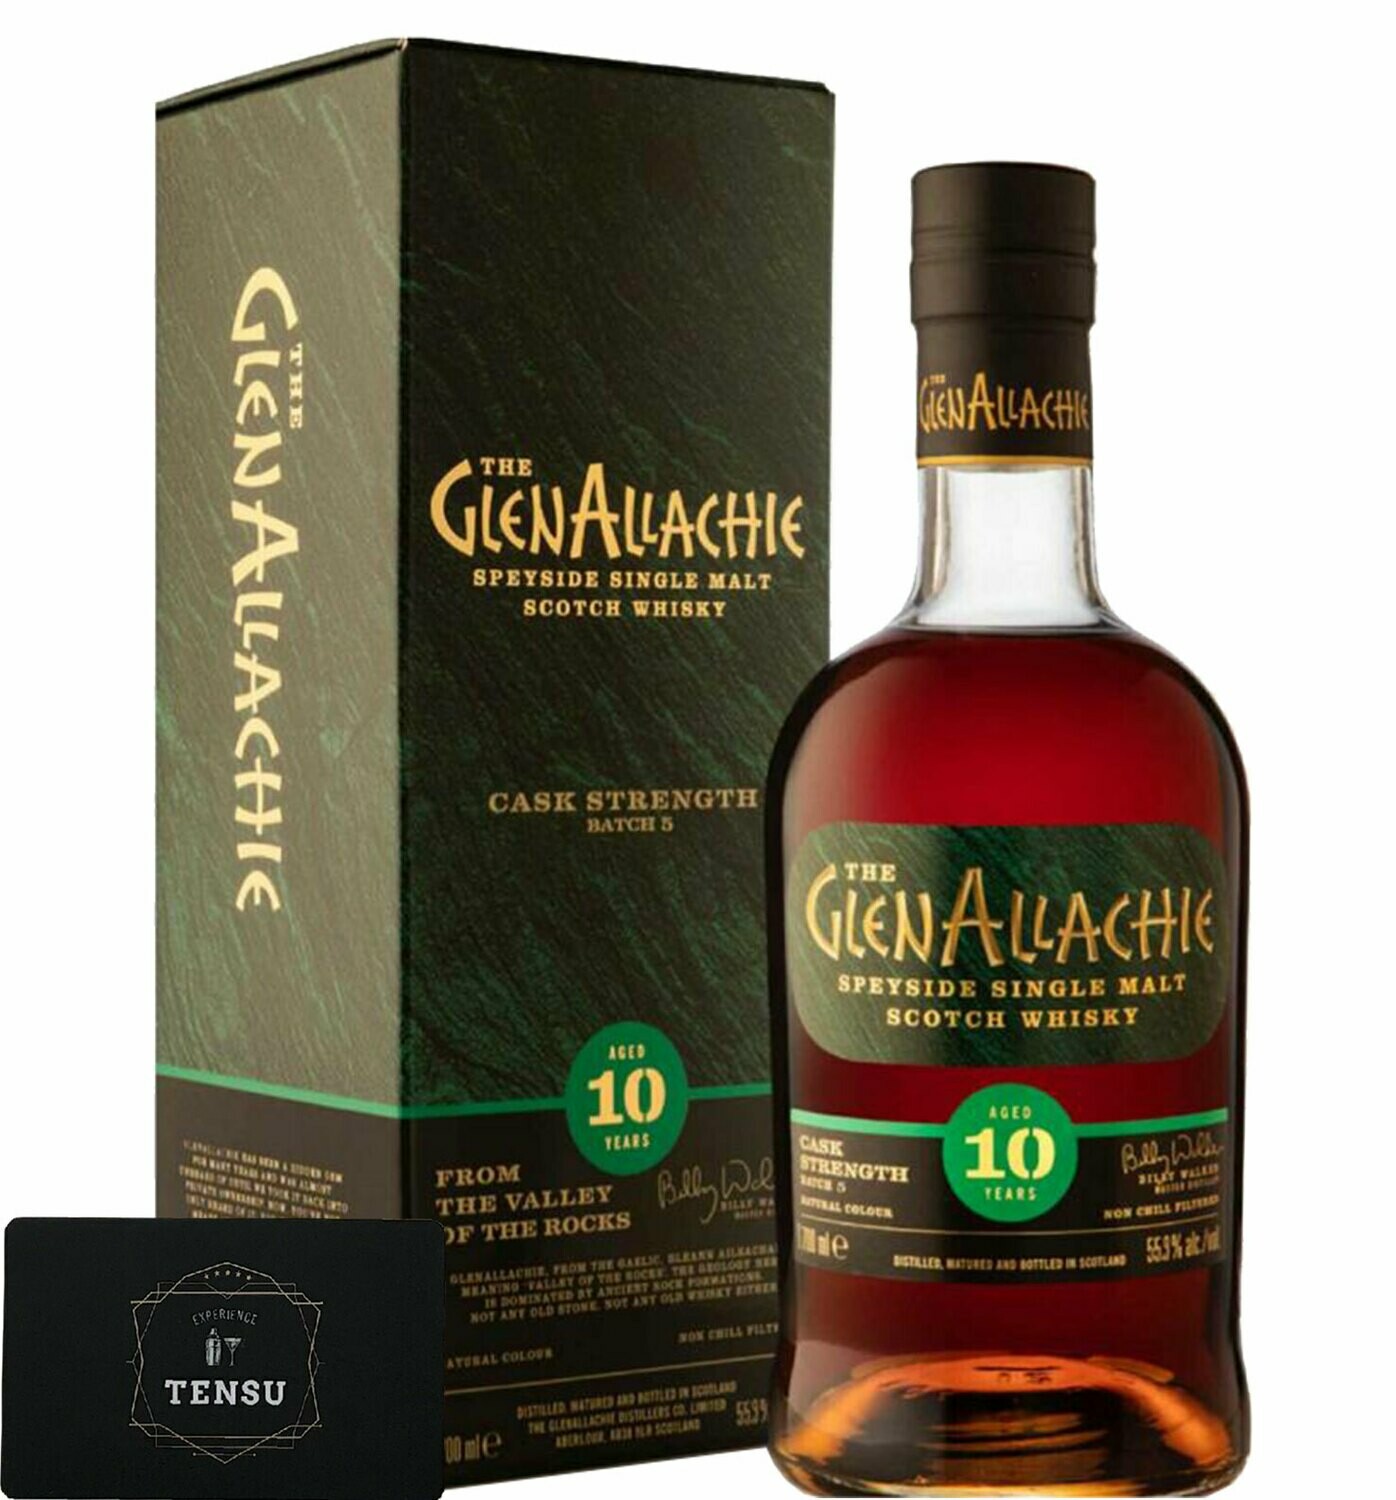 GlenAllachie 10 Years Old [Cask Strength - Batch 5] 55.9 "OB"